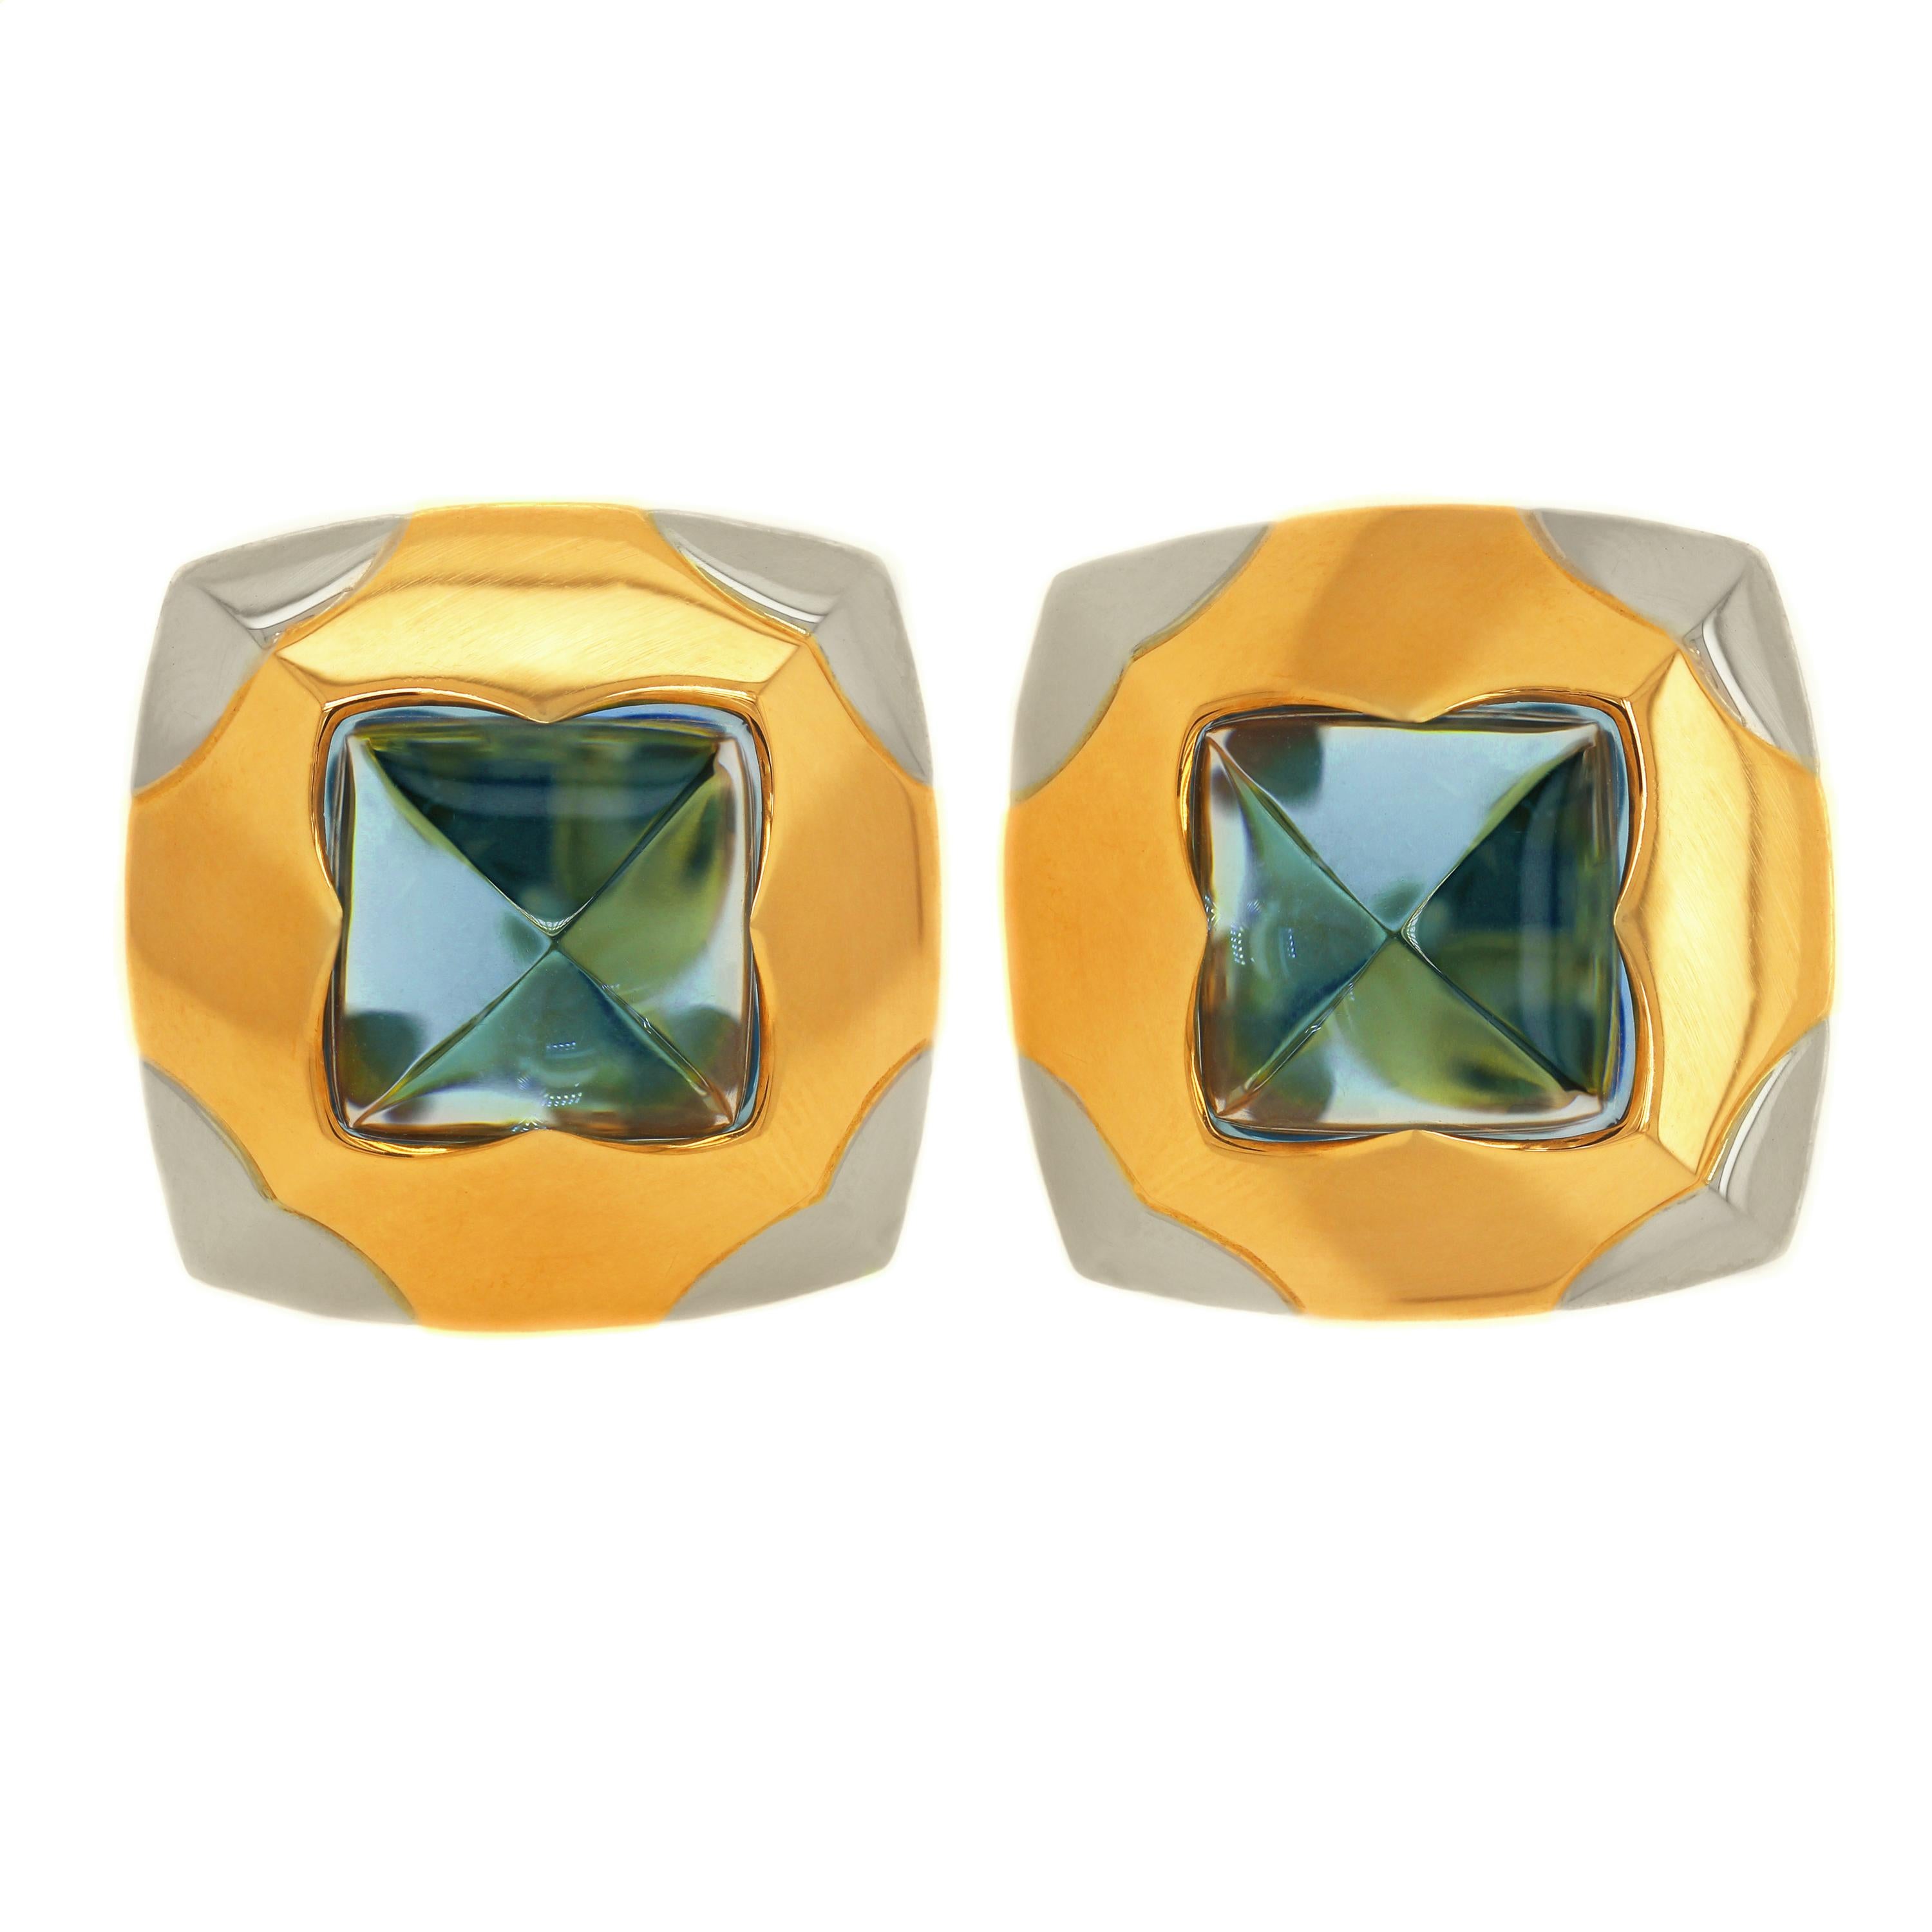 Bvlgari Roma Pyramid 18K Two Tone Gold Sugarloaf Cabochon Blue Topaz Earrings In Excellent Condition For Sale In Boca Raton, FL